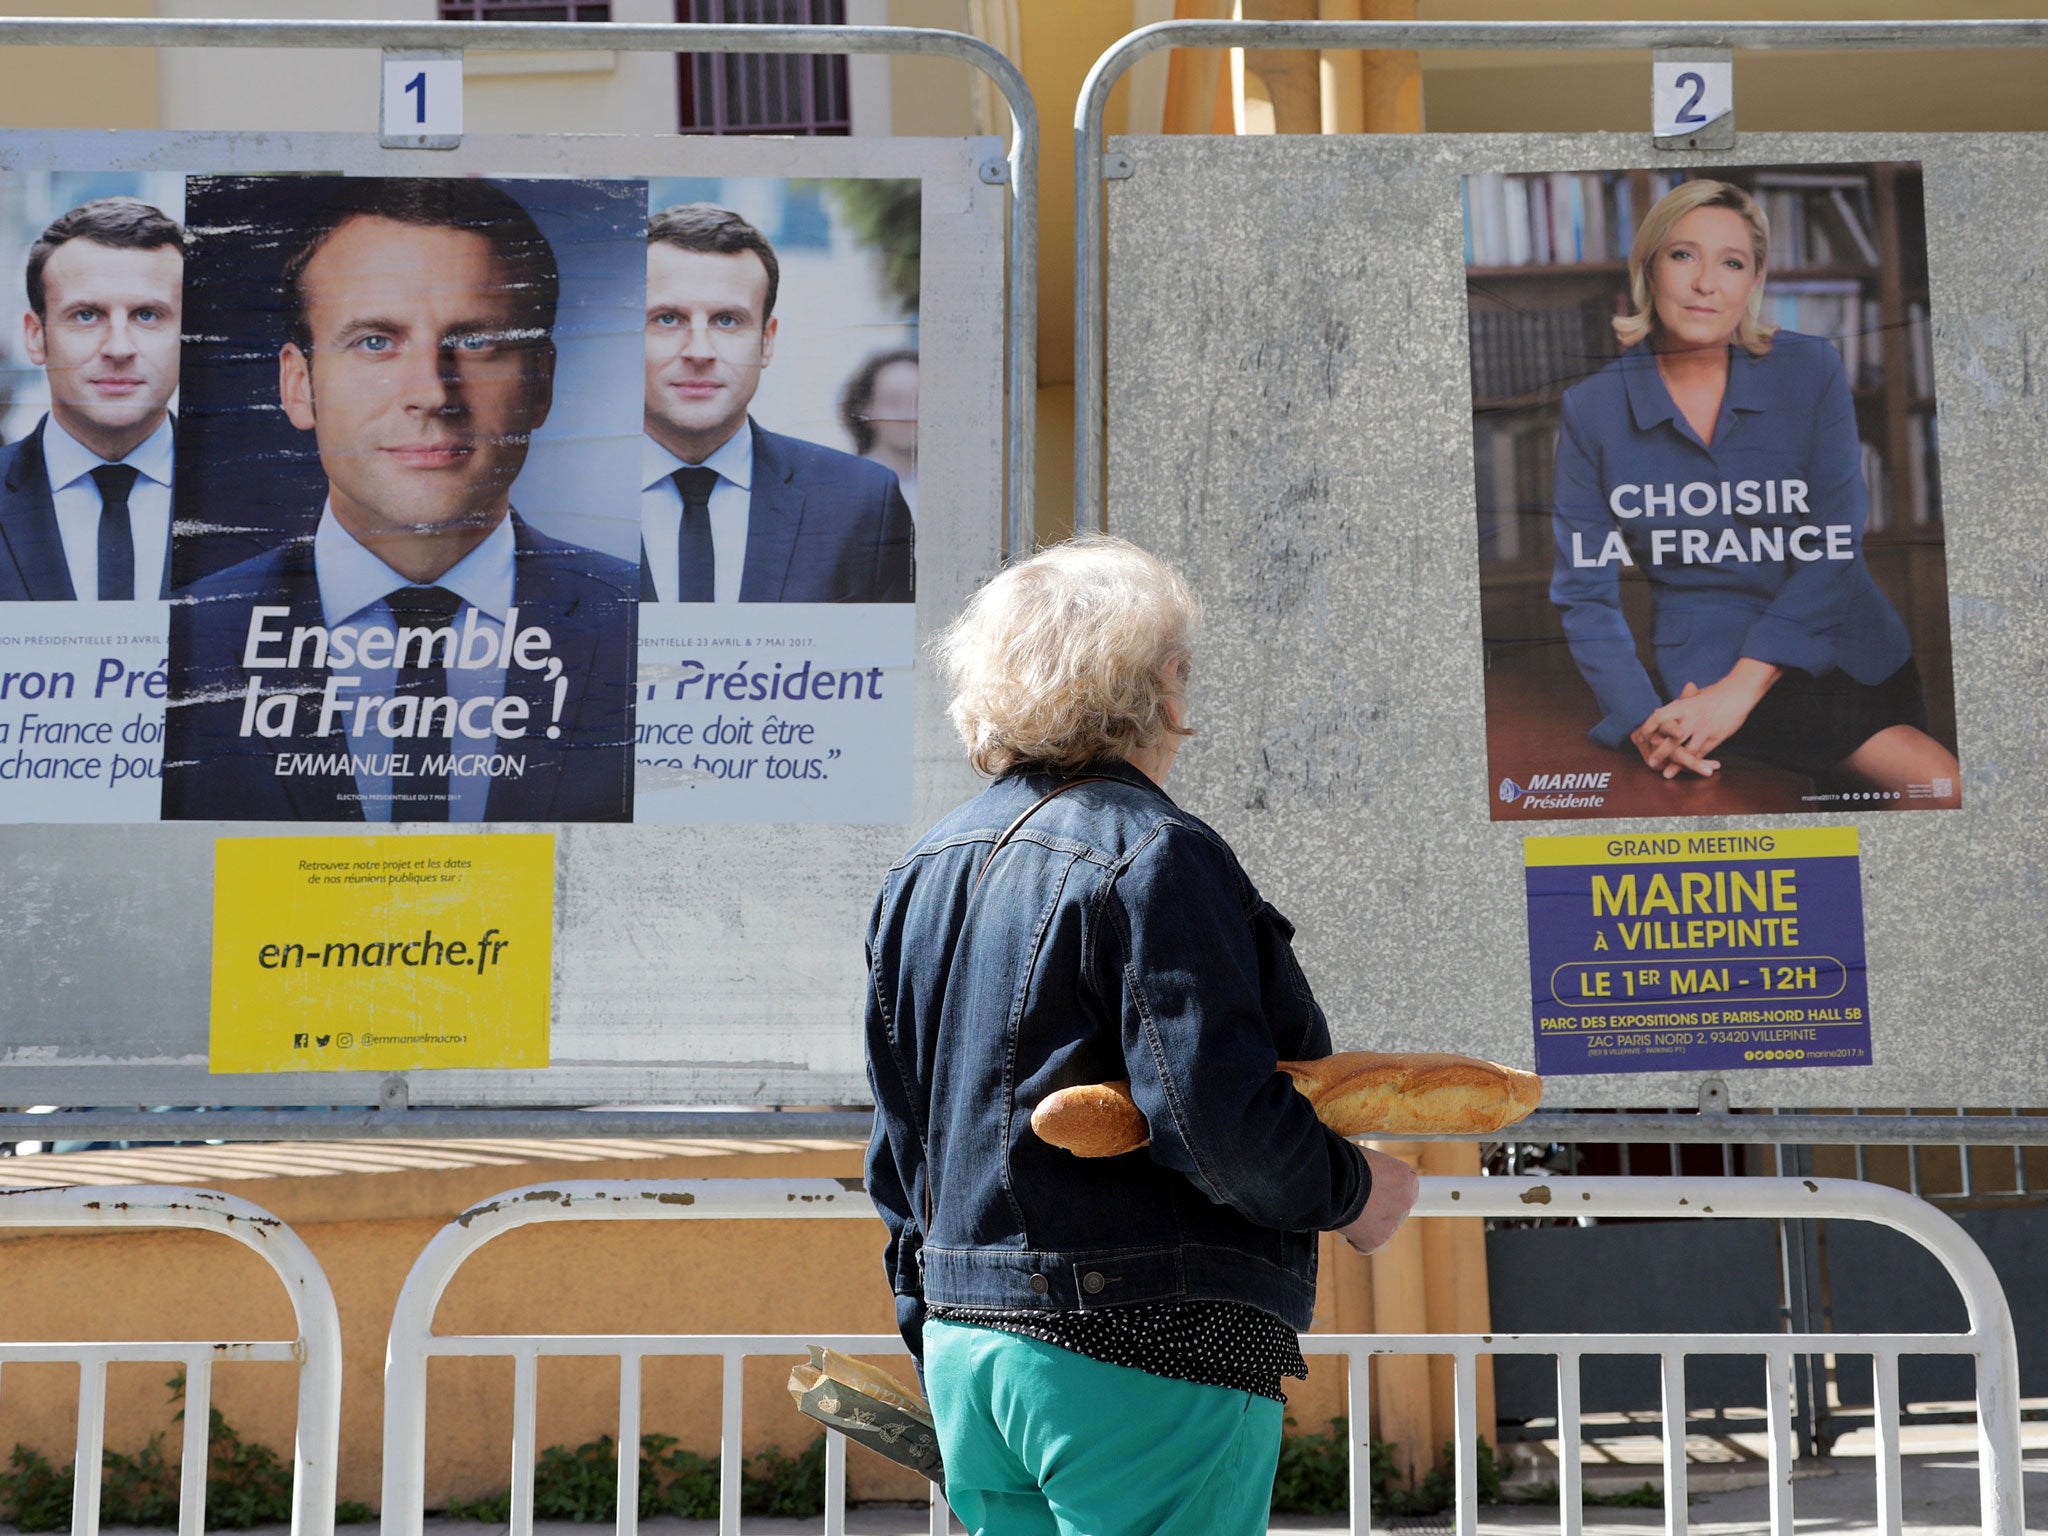 France goes to the polls for the second round of voting to choose a new president on Sunday